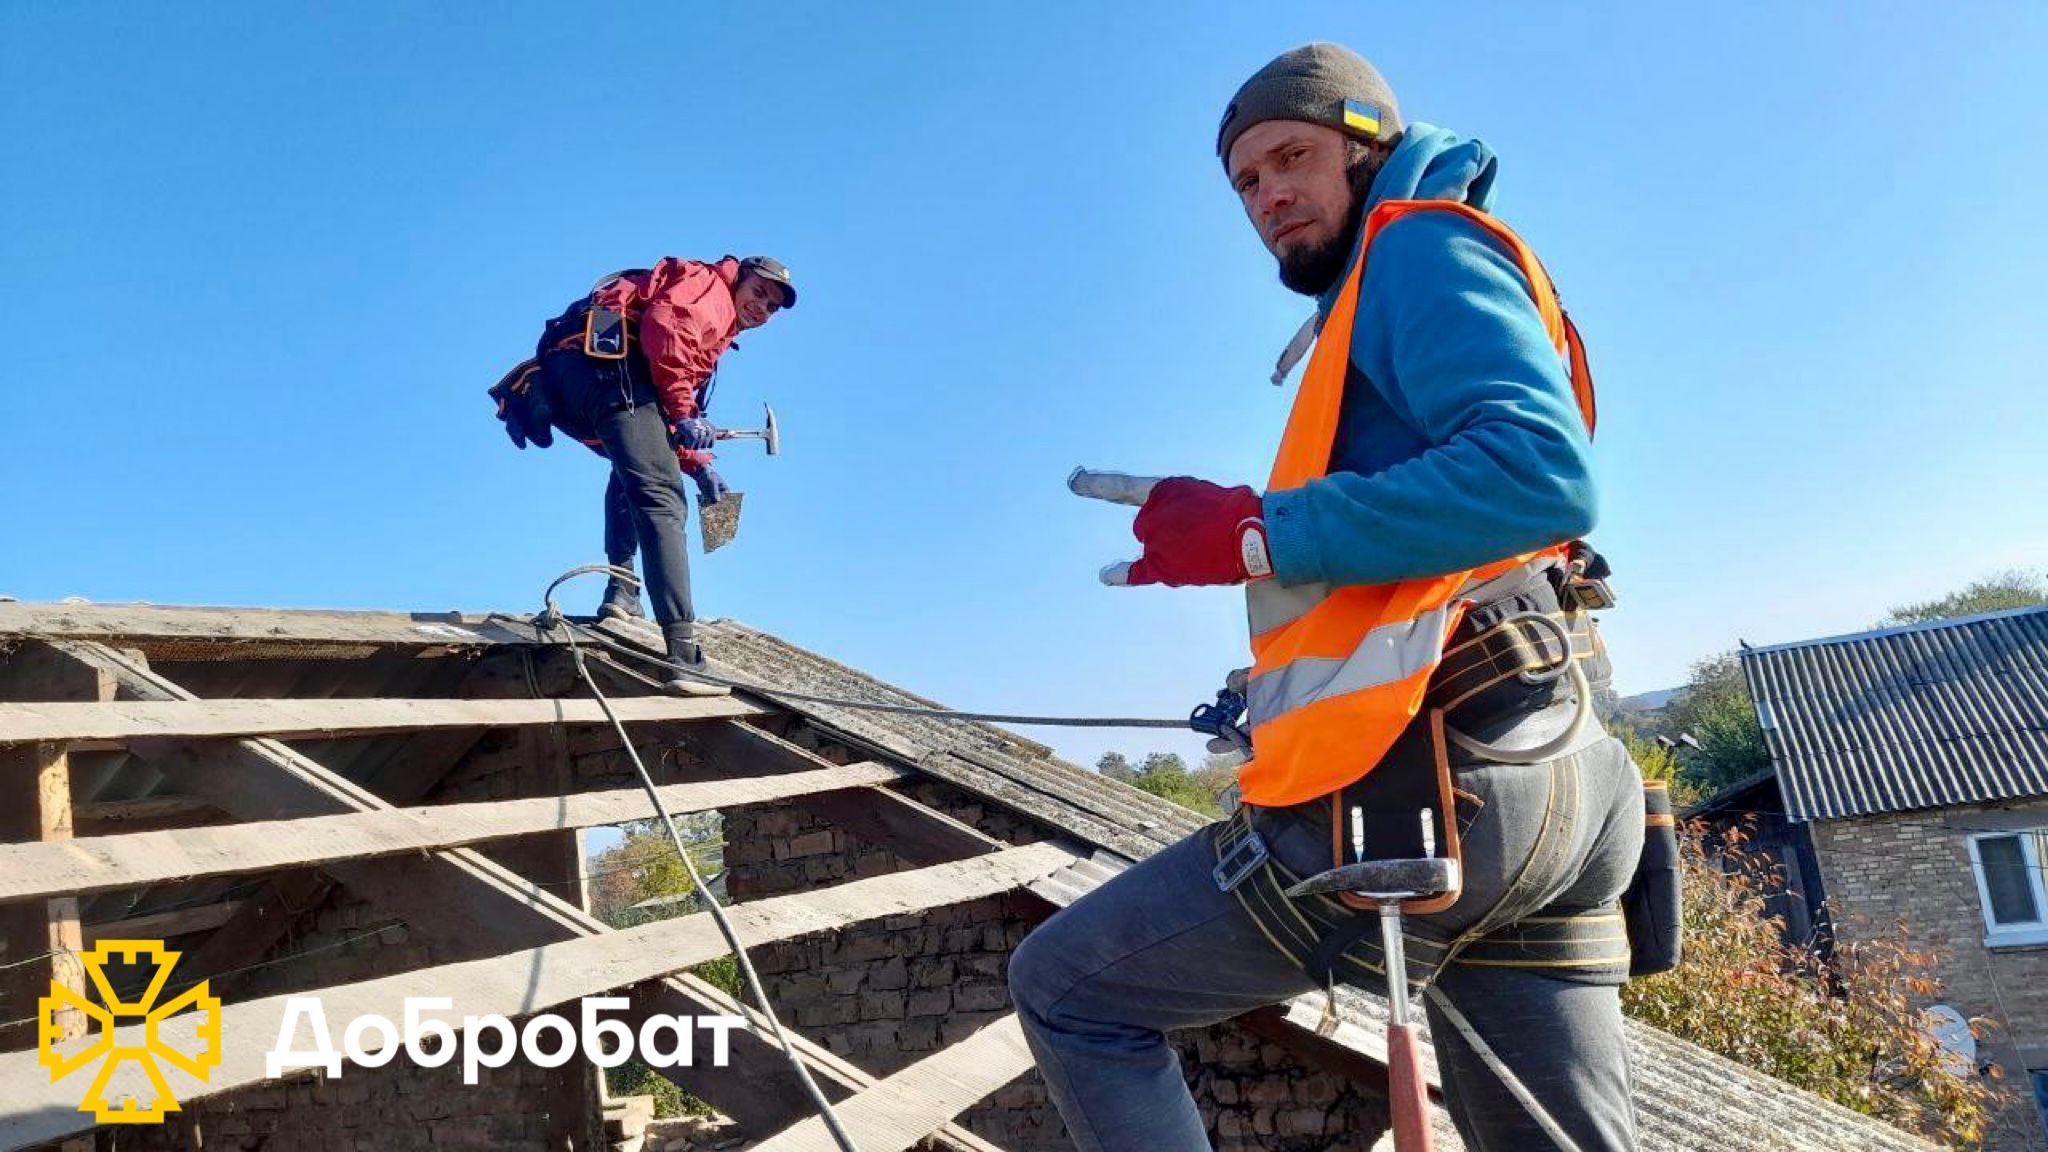 “Dobrobat” on guard of urgent reconstruction – we are getting stronger every day